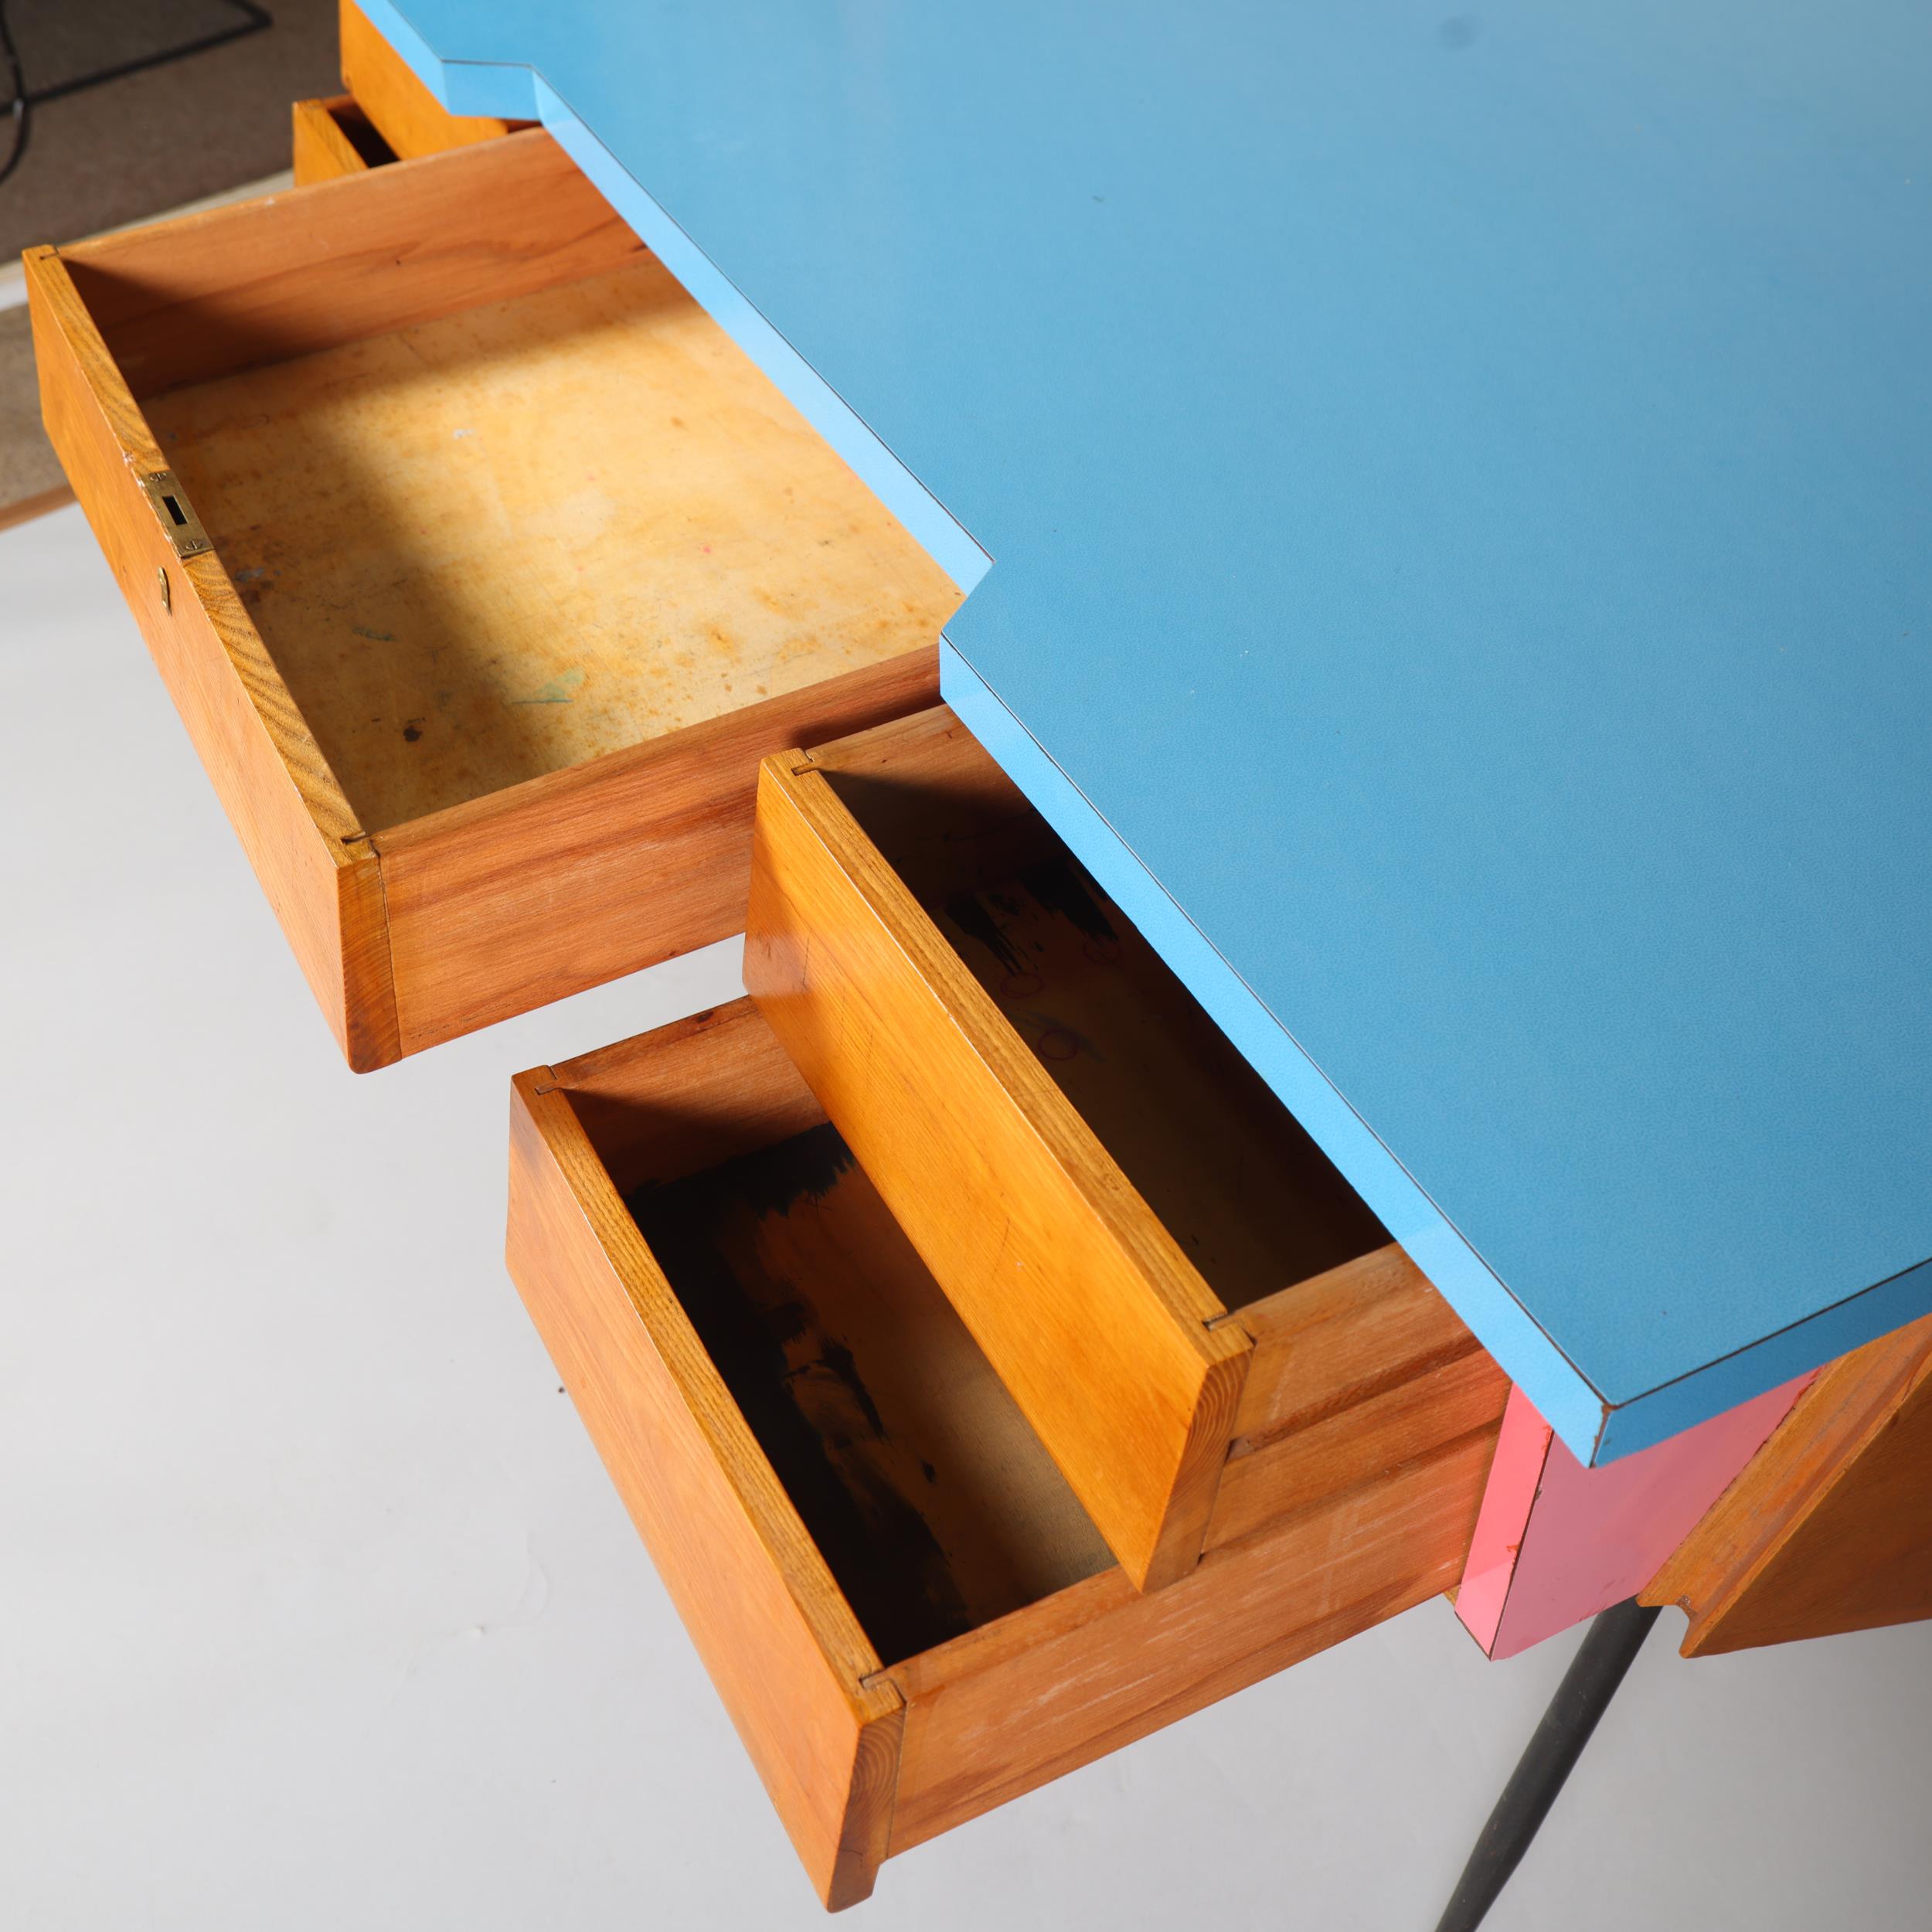 A mid 20th century Thonet desk, with beech ply body, pine fronted drawers with solid beech interior, - Image 5 of 7